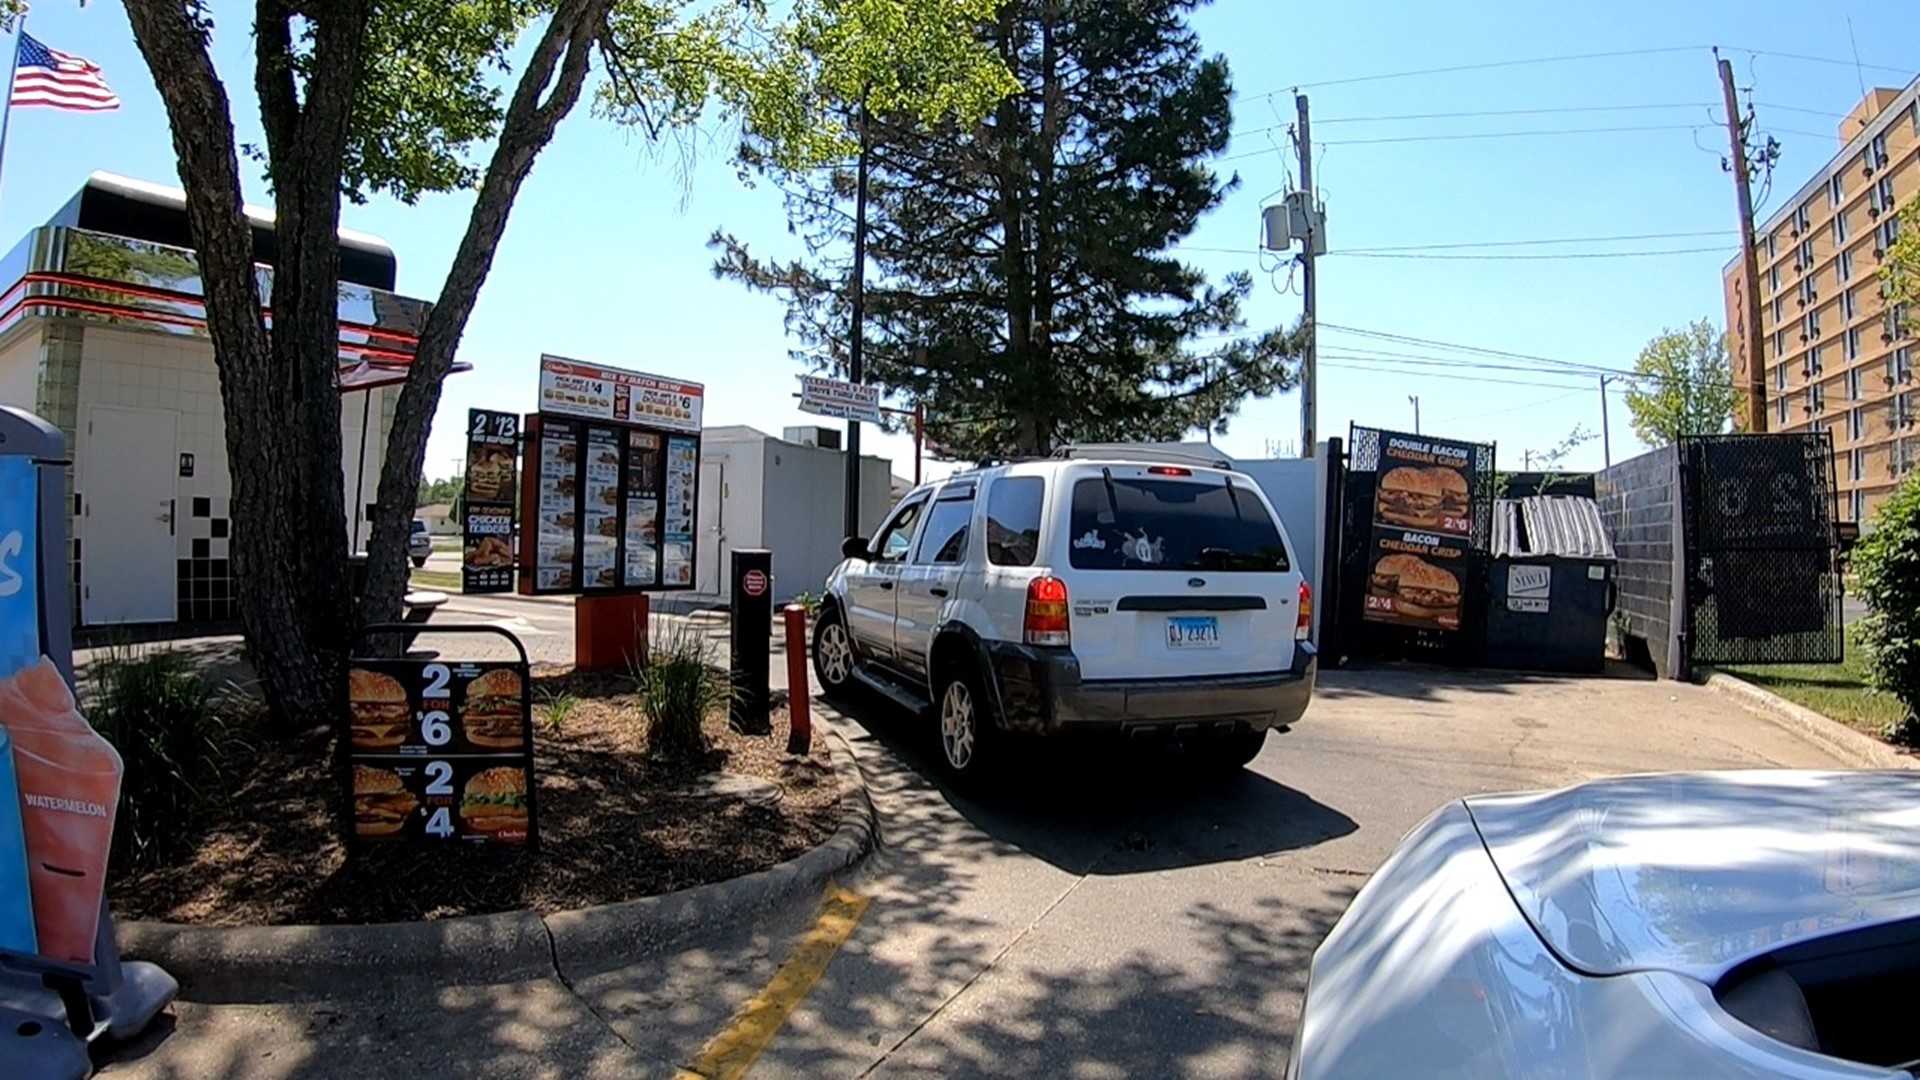 Last September, the Quad Cities Checkers franchise rolled out artificial intelligence at the drive-thru to take orders, helping alleviate its staff shortages.